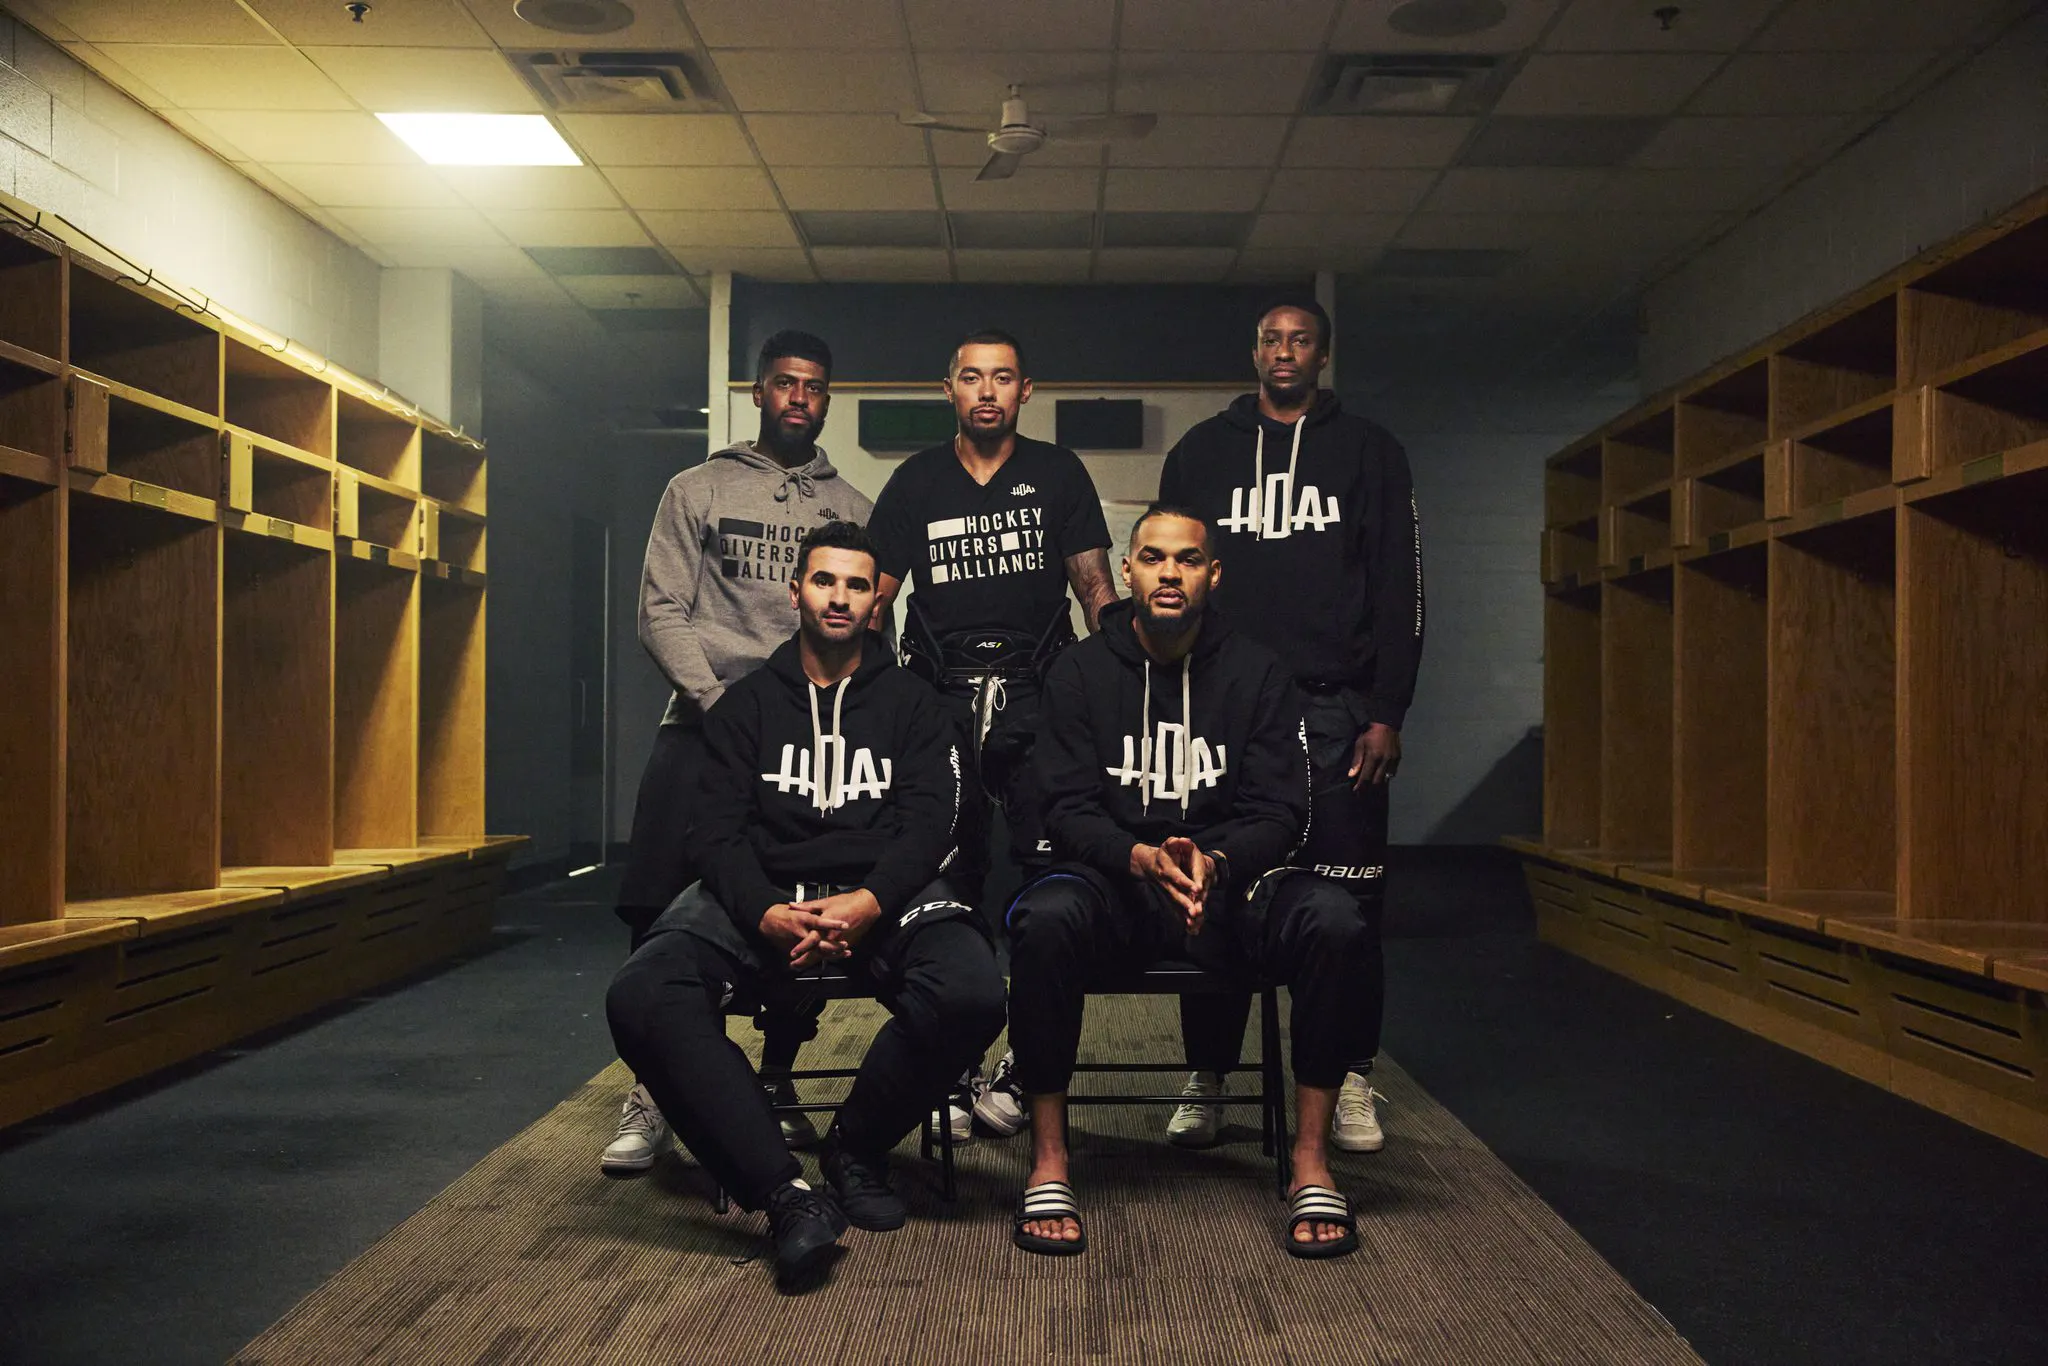 Seravalli: Hockey Diversity Alliance’s new #TapeOutHate campaign sticks with you